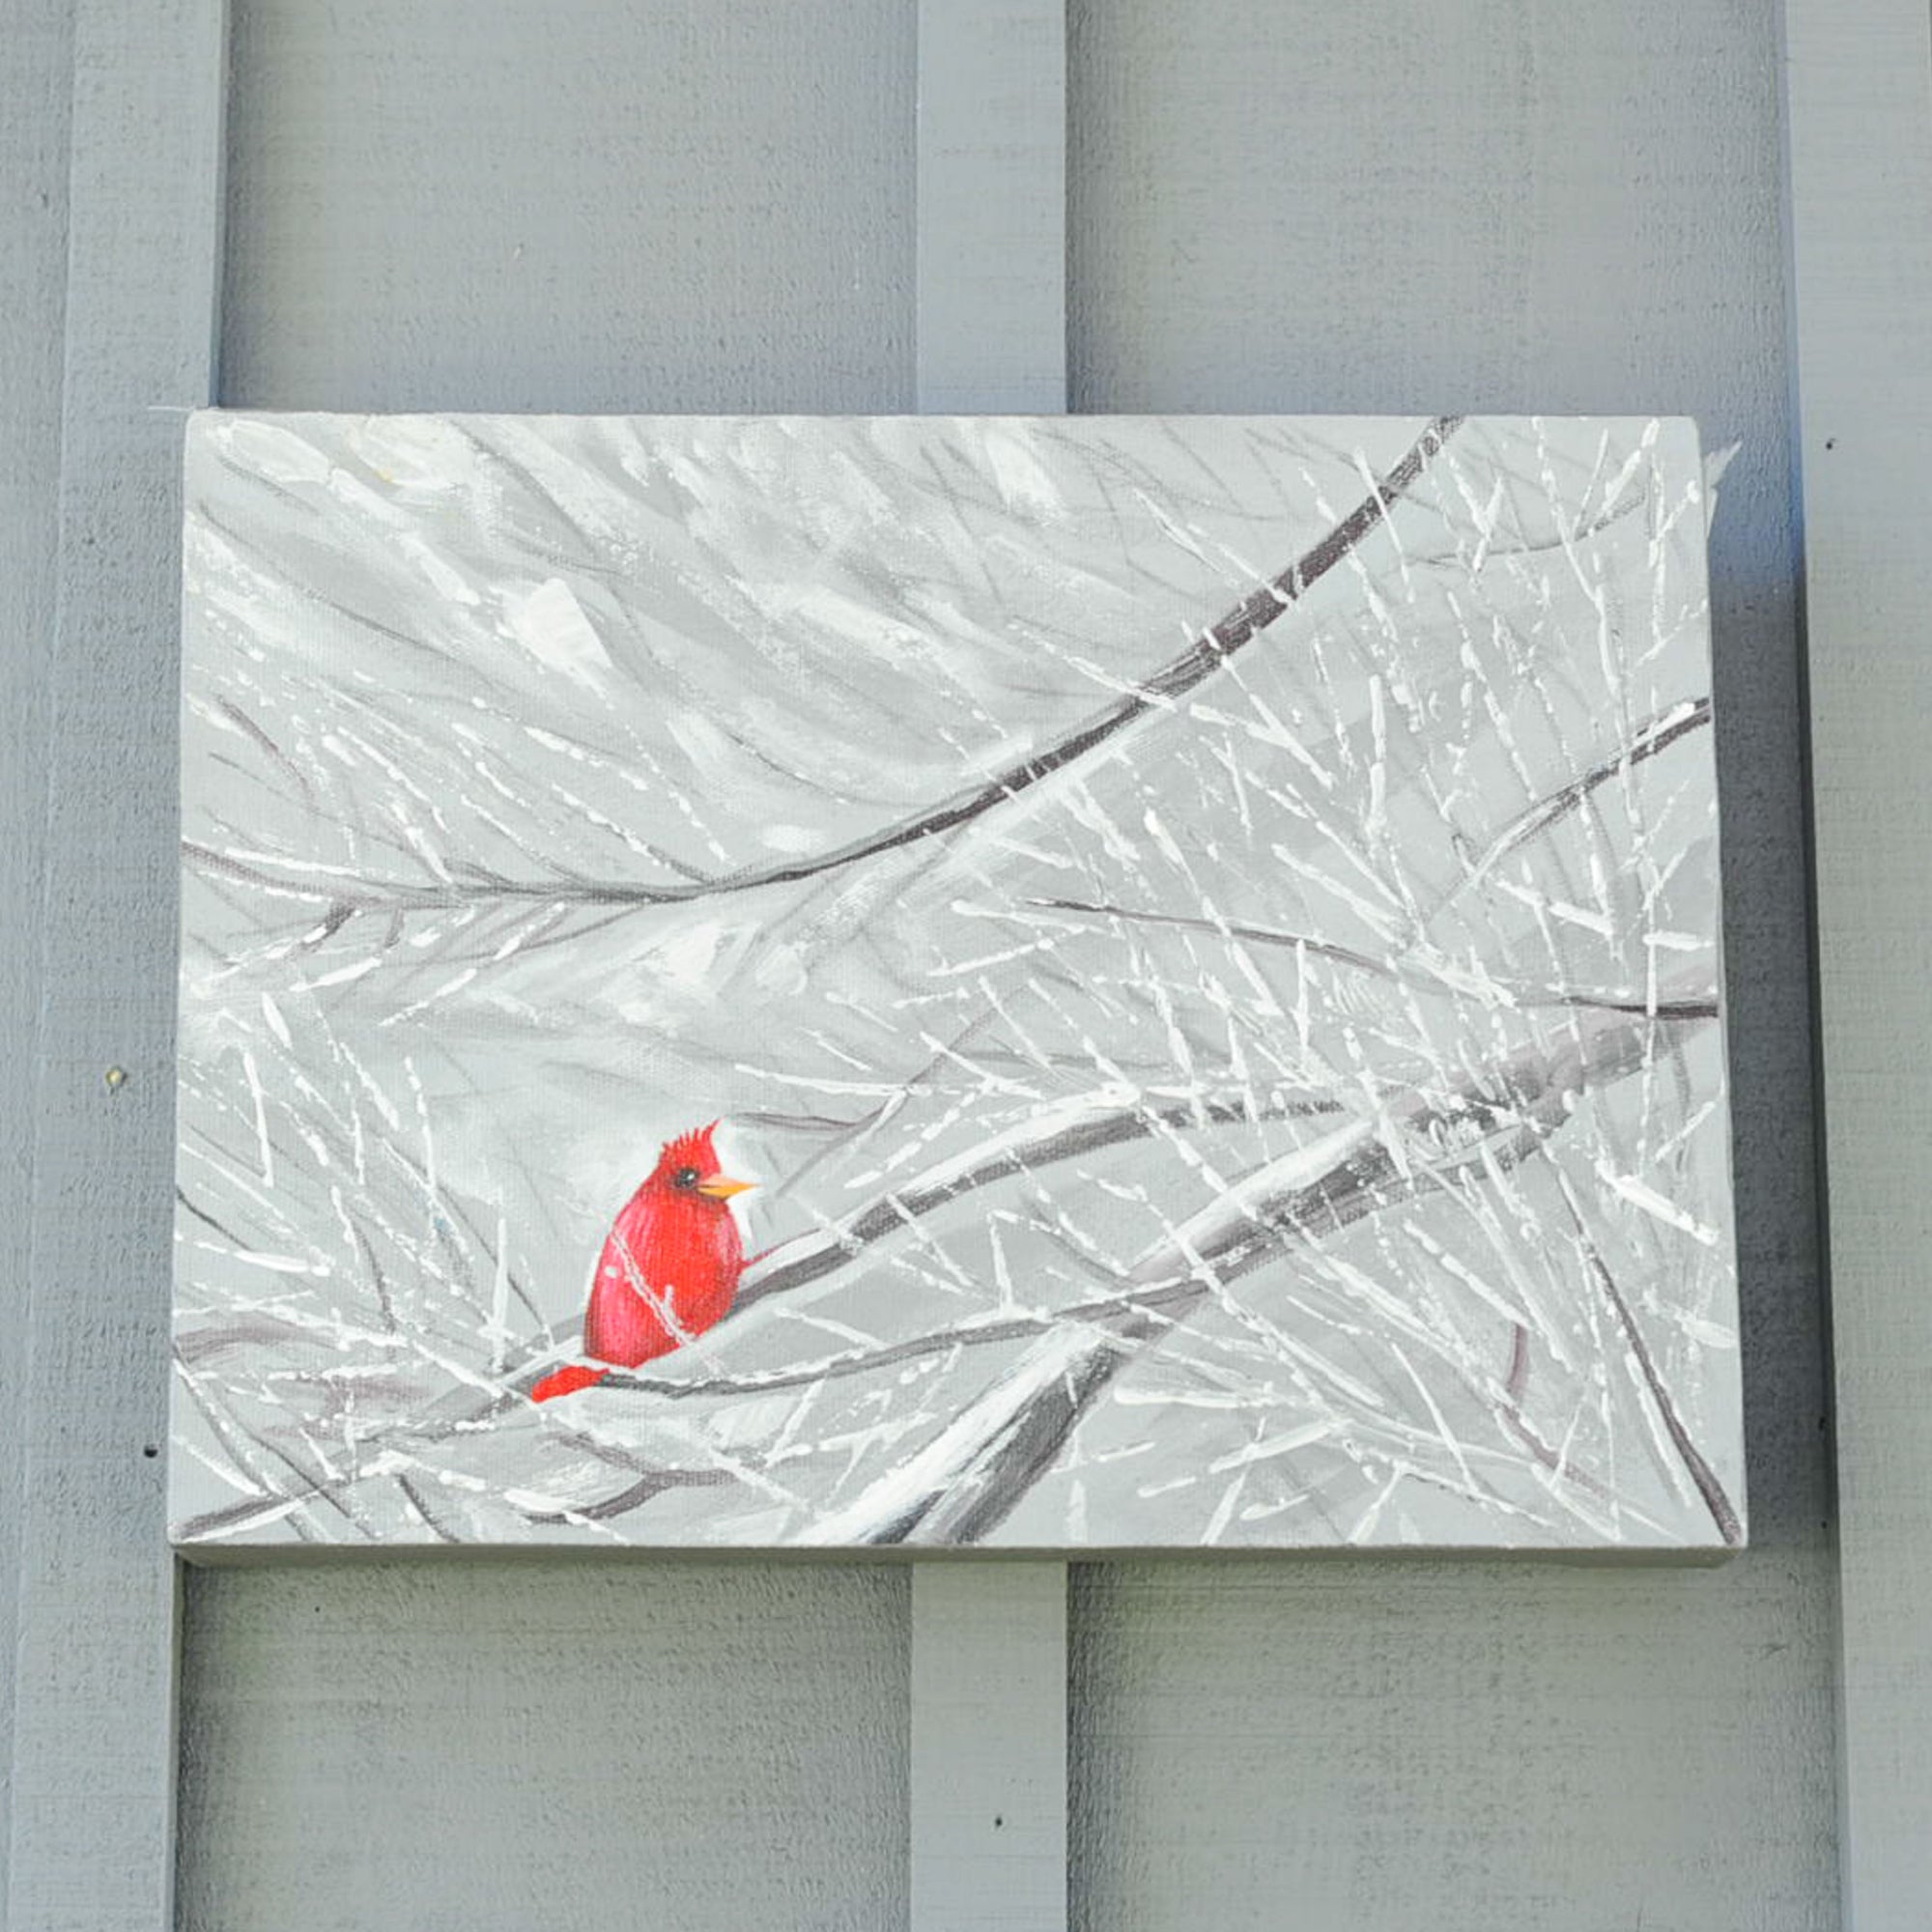 Cardinal on a snowy branch in the winter